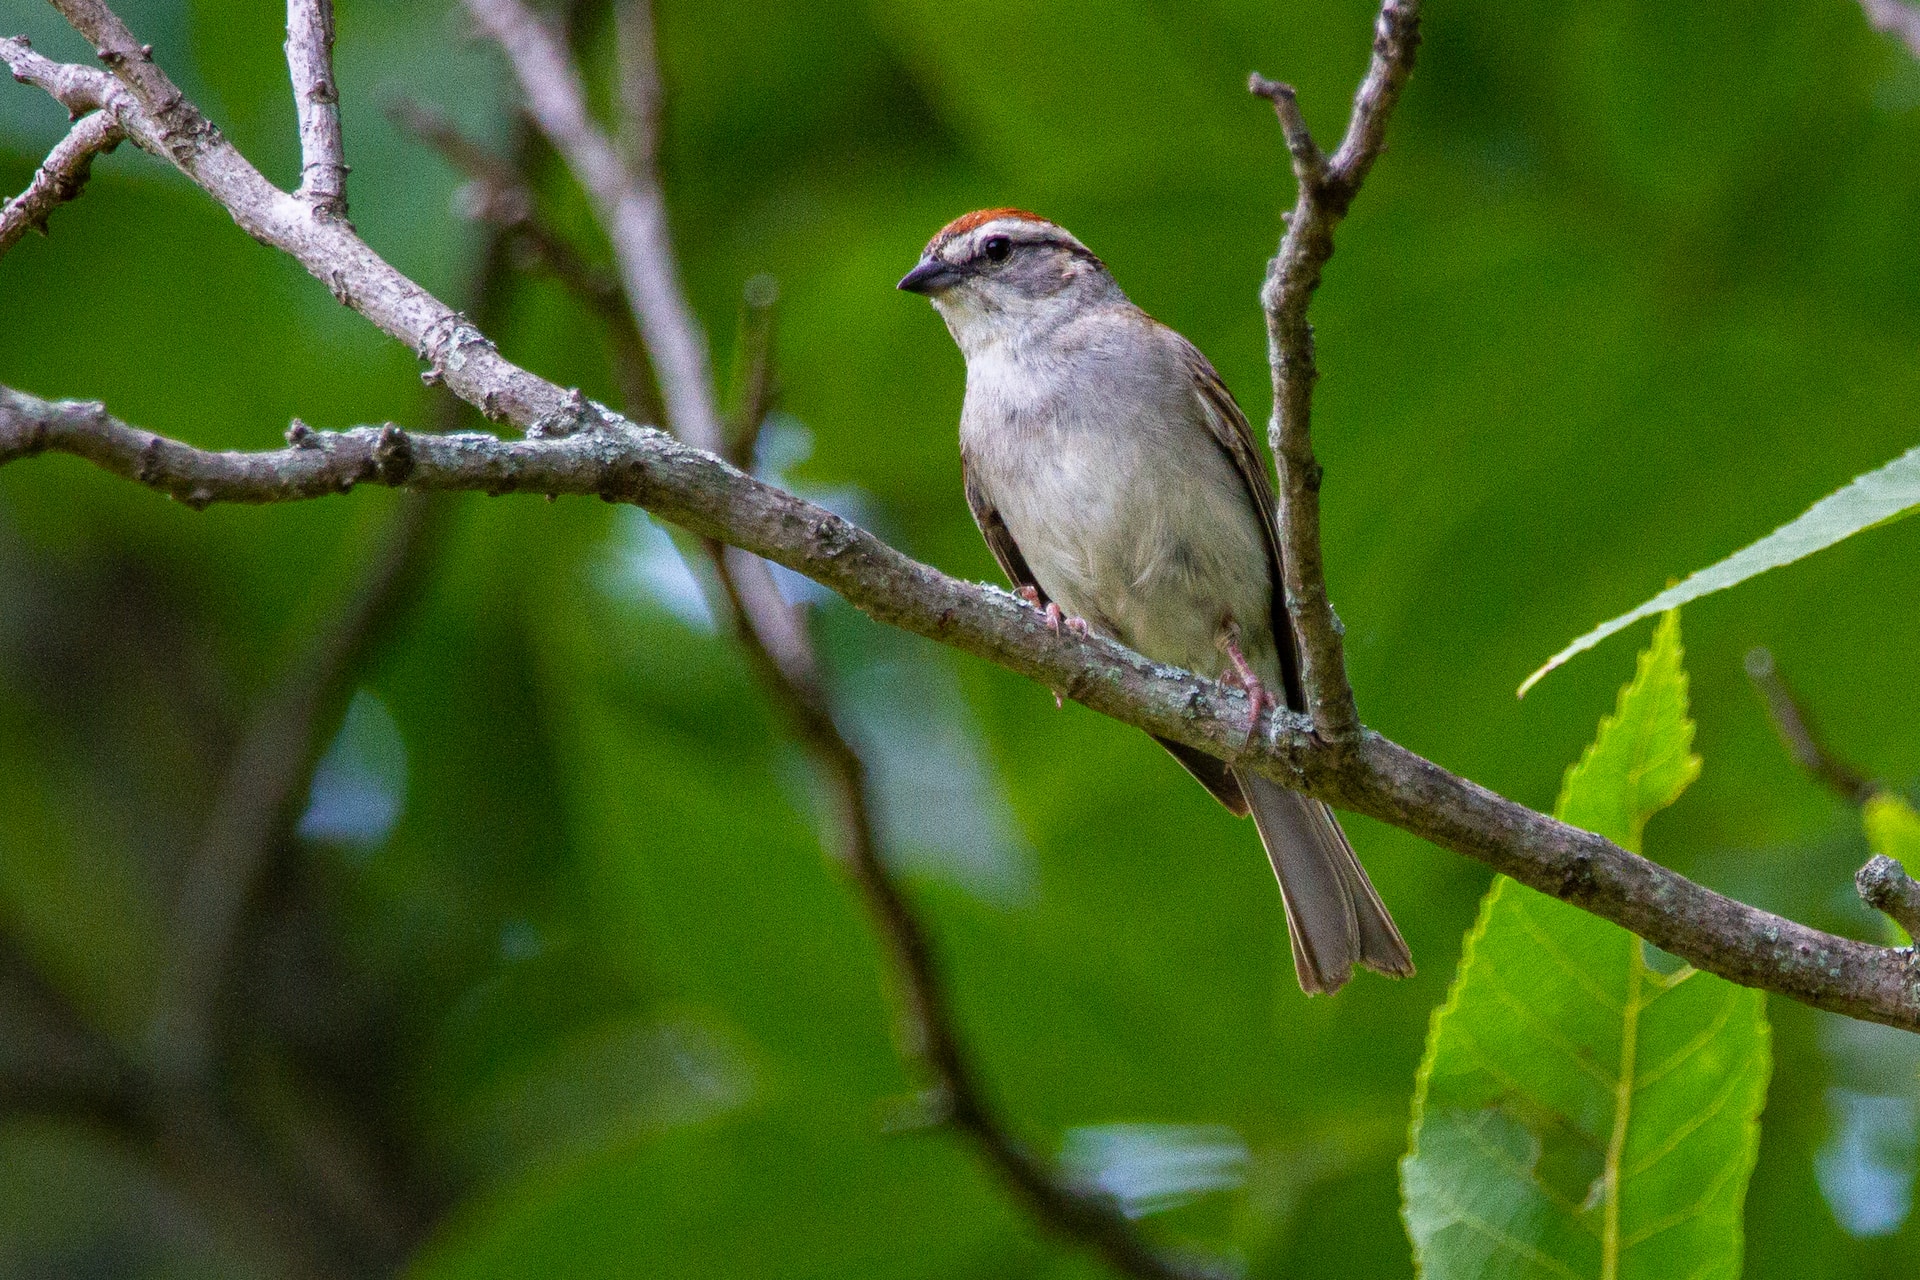 A chipping sparrow sitting on a tree branch